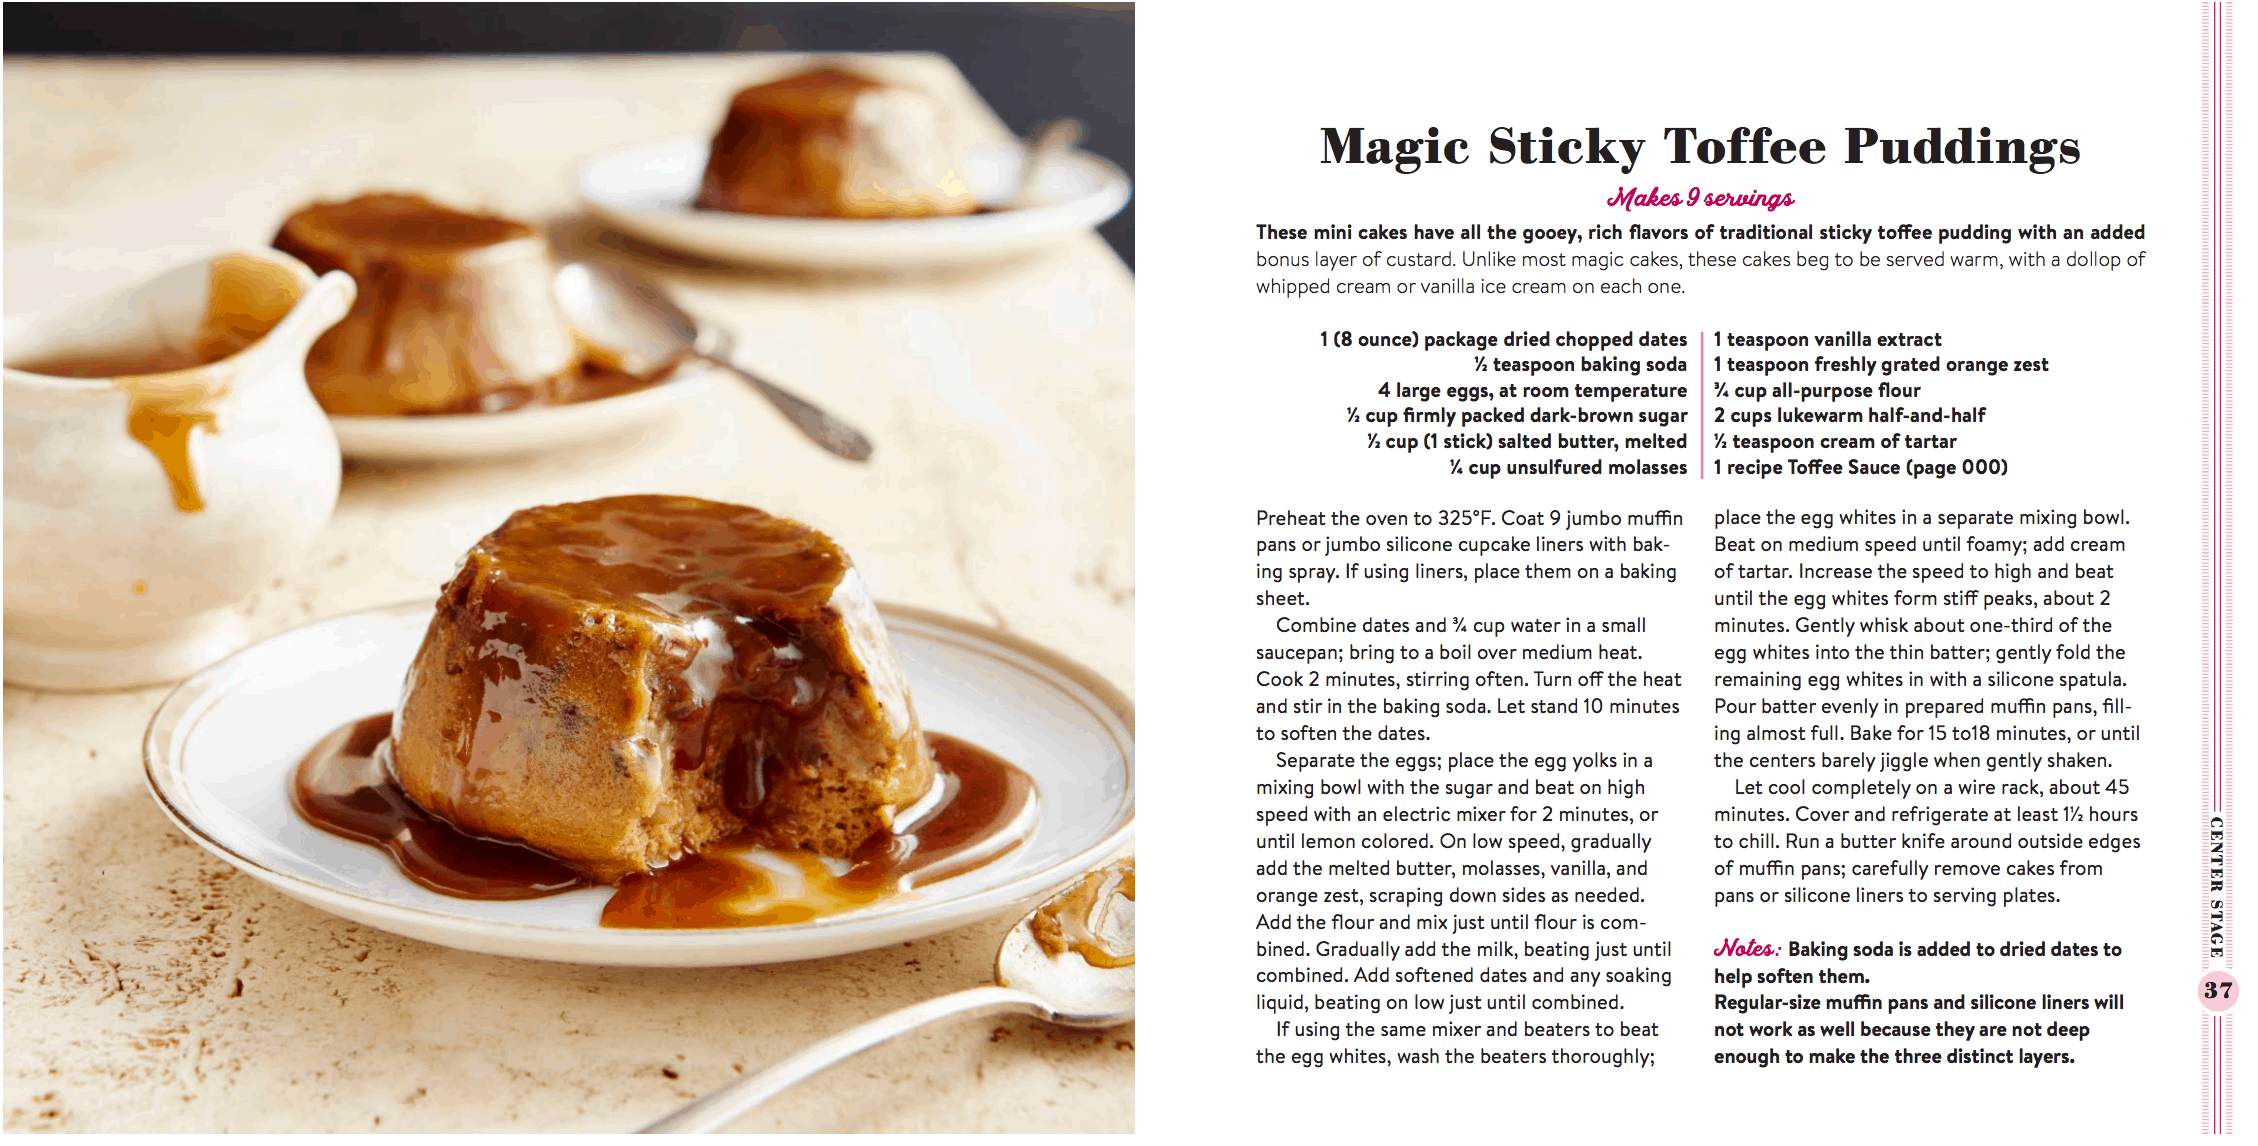 Sticky Toffee Pudding sample spread